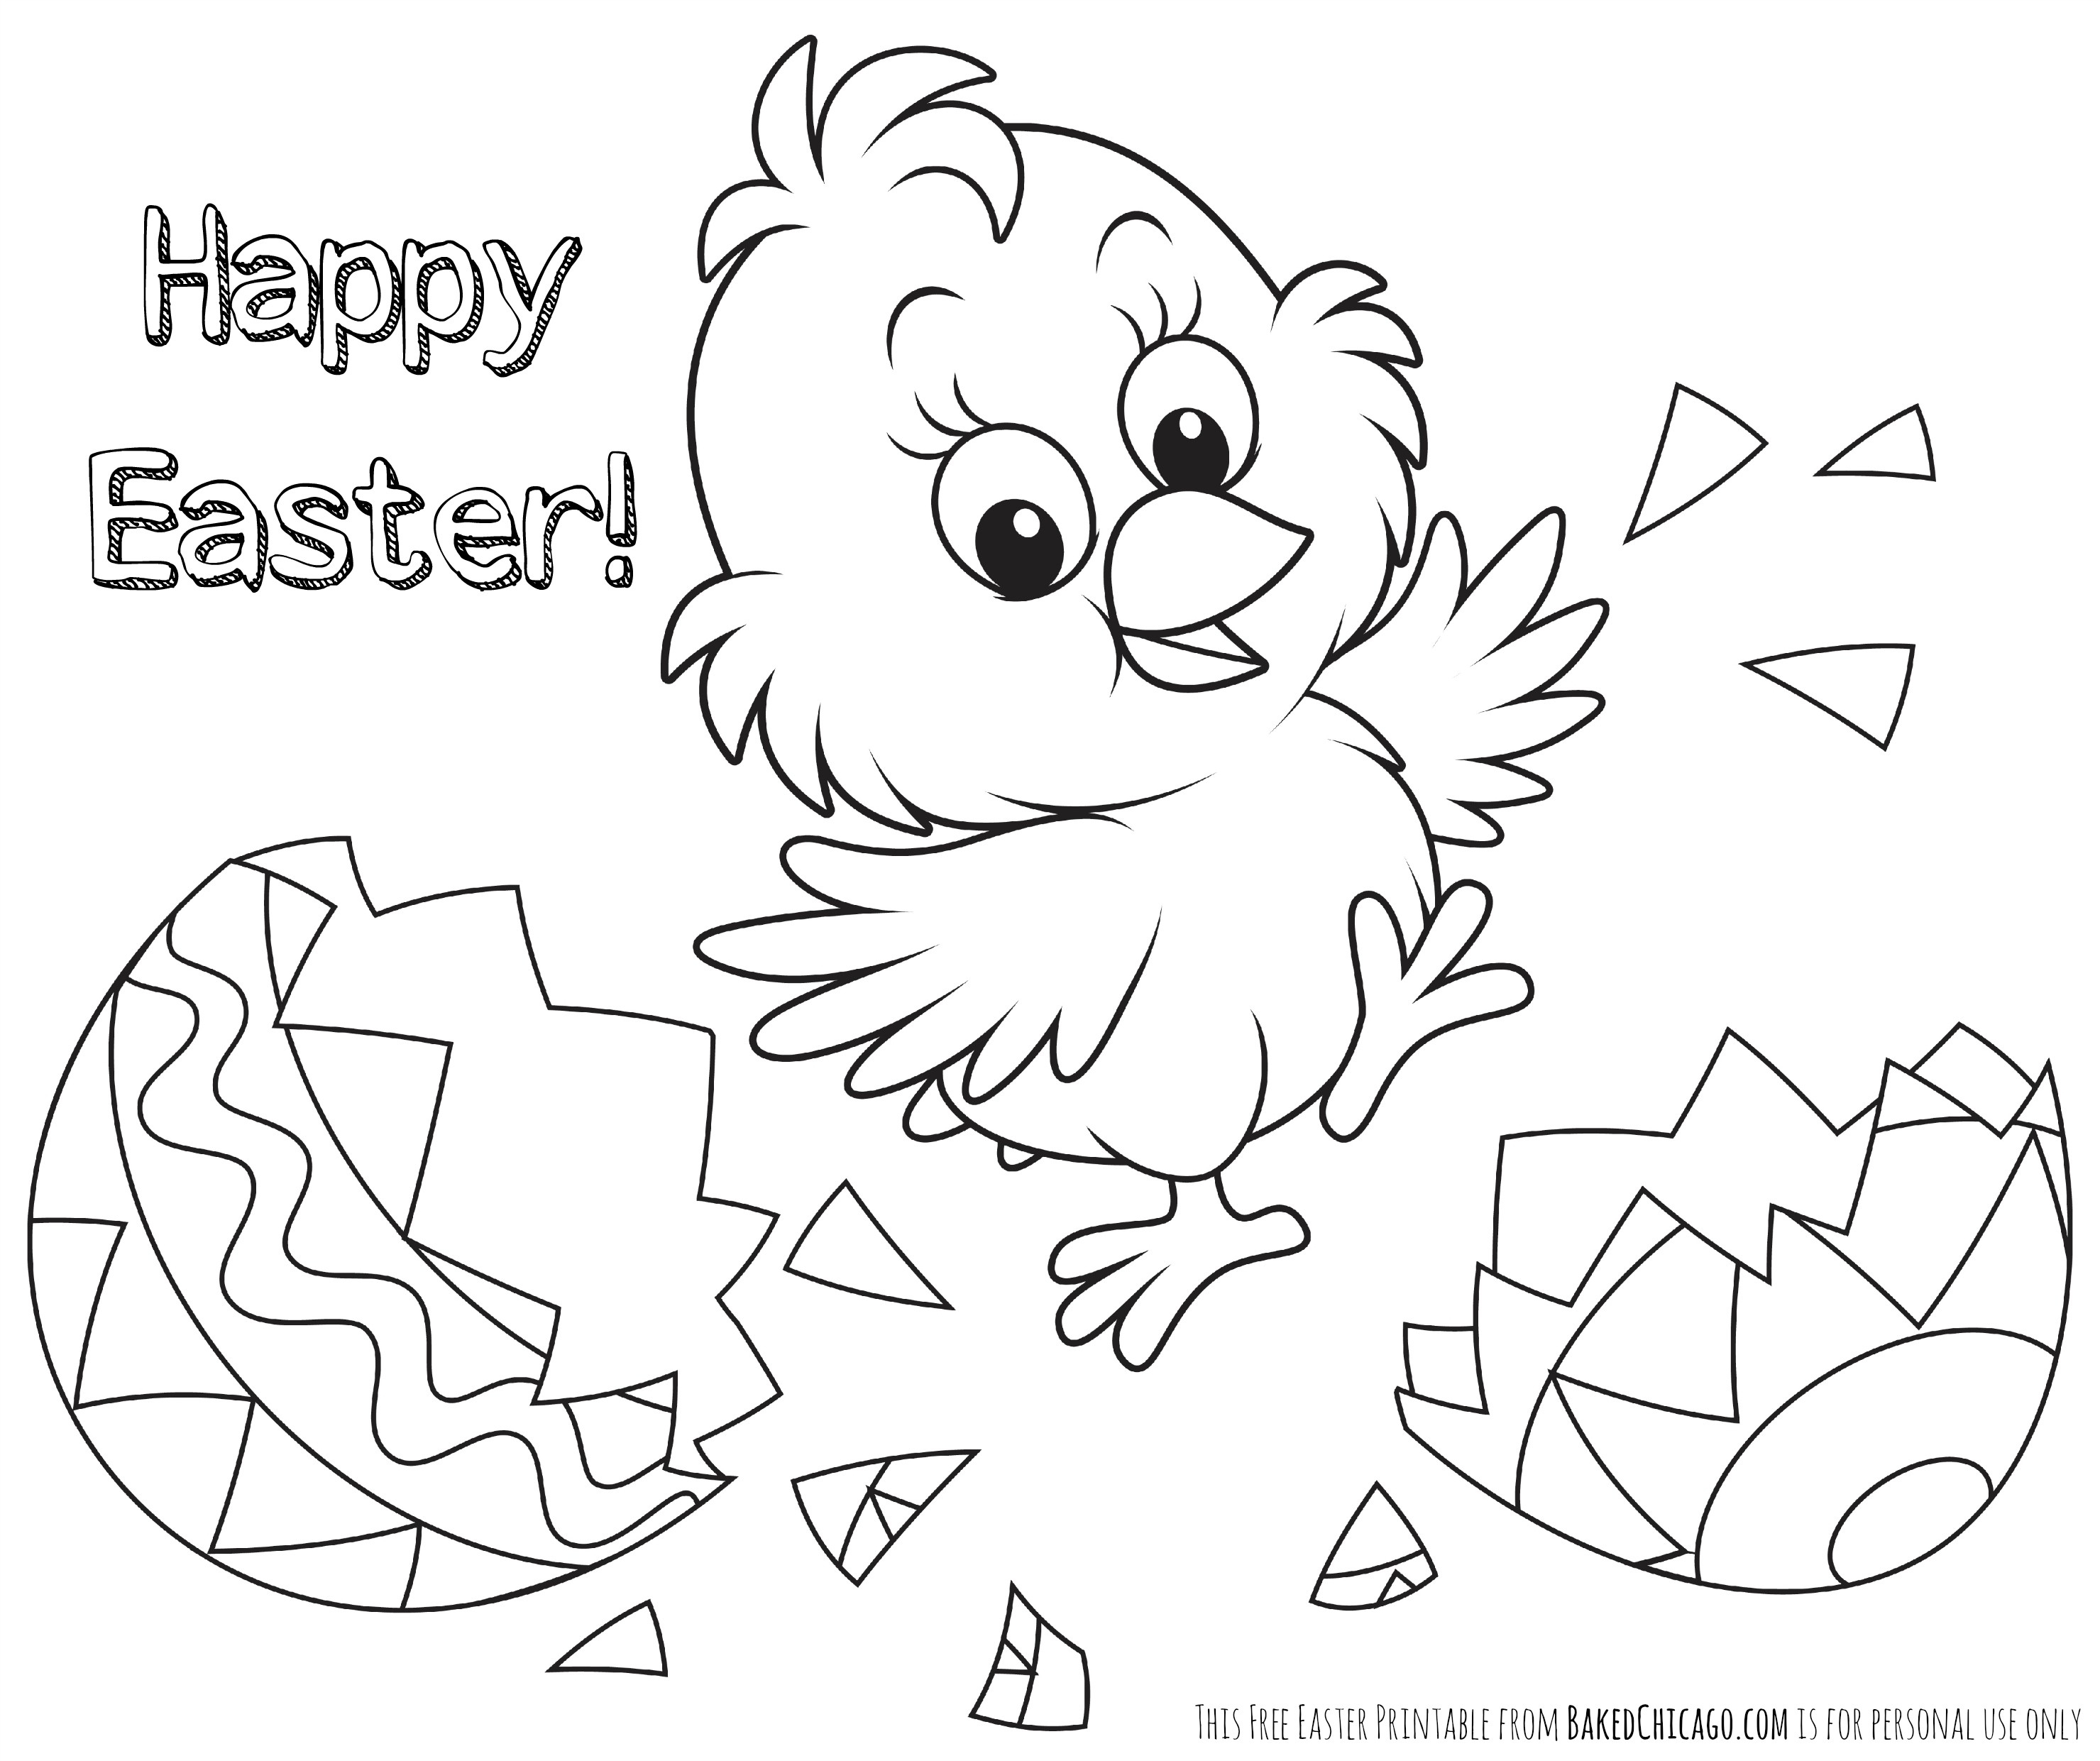 Coloring Pages : Free Easter Coloringes For Kidsfree To Print - Free Easter Color Pages Printable